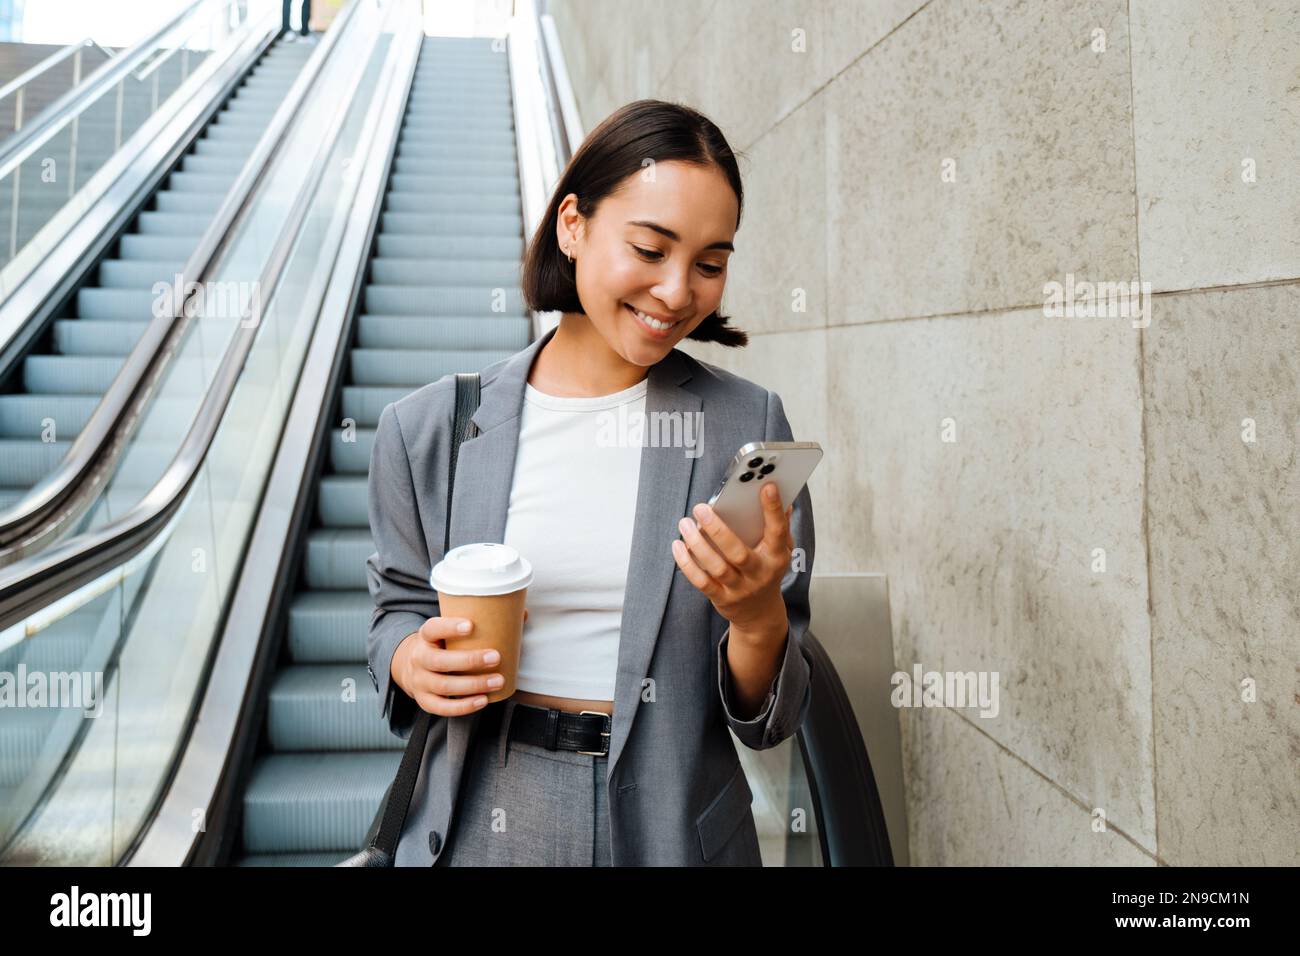 Young smiling asian woman holding coffee and using mobile phone while standing on escalator outdoors Stock Photo